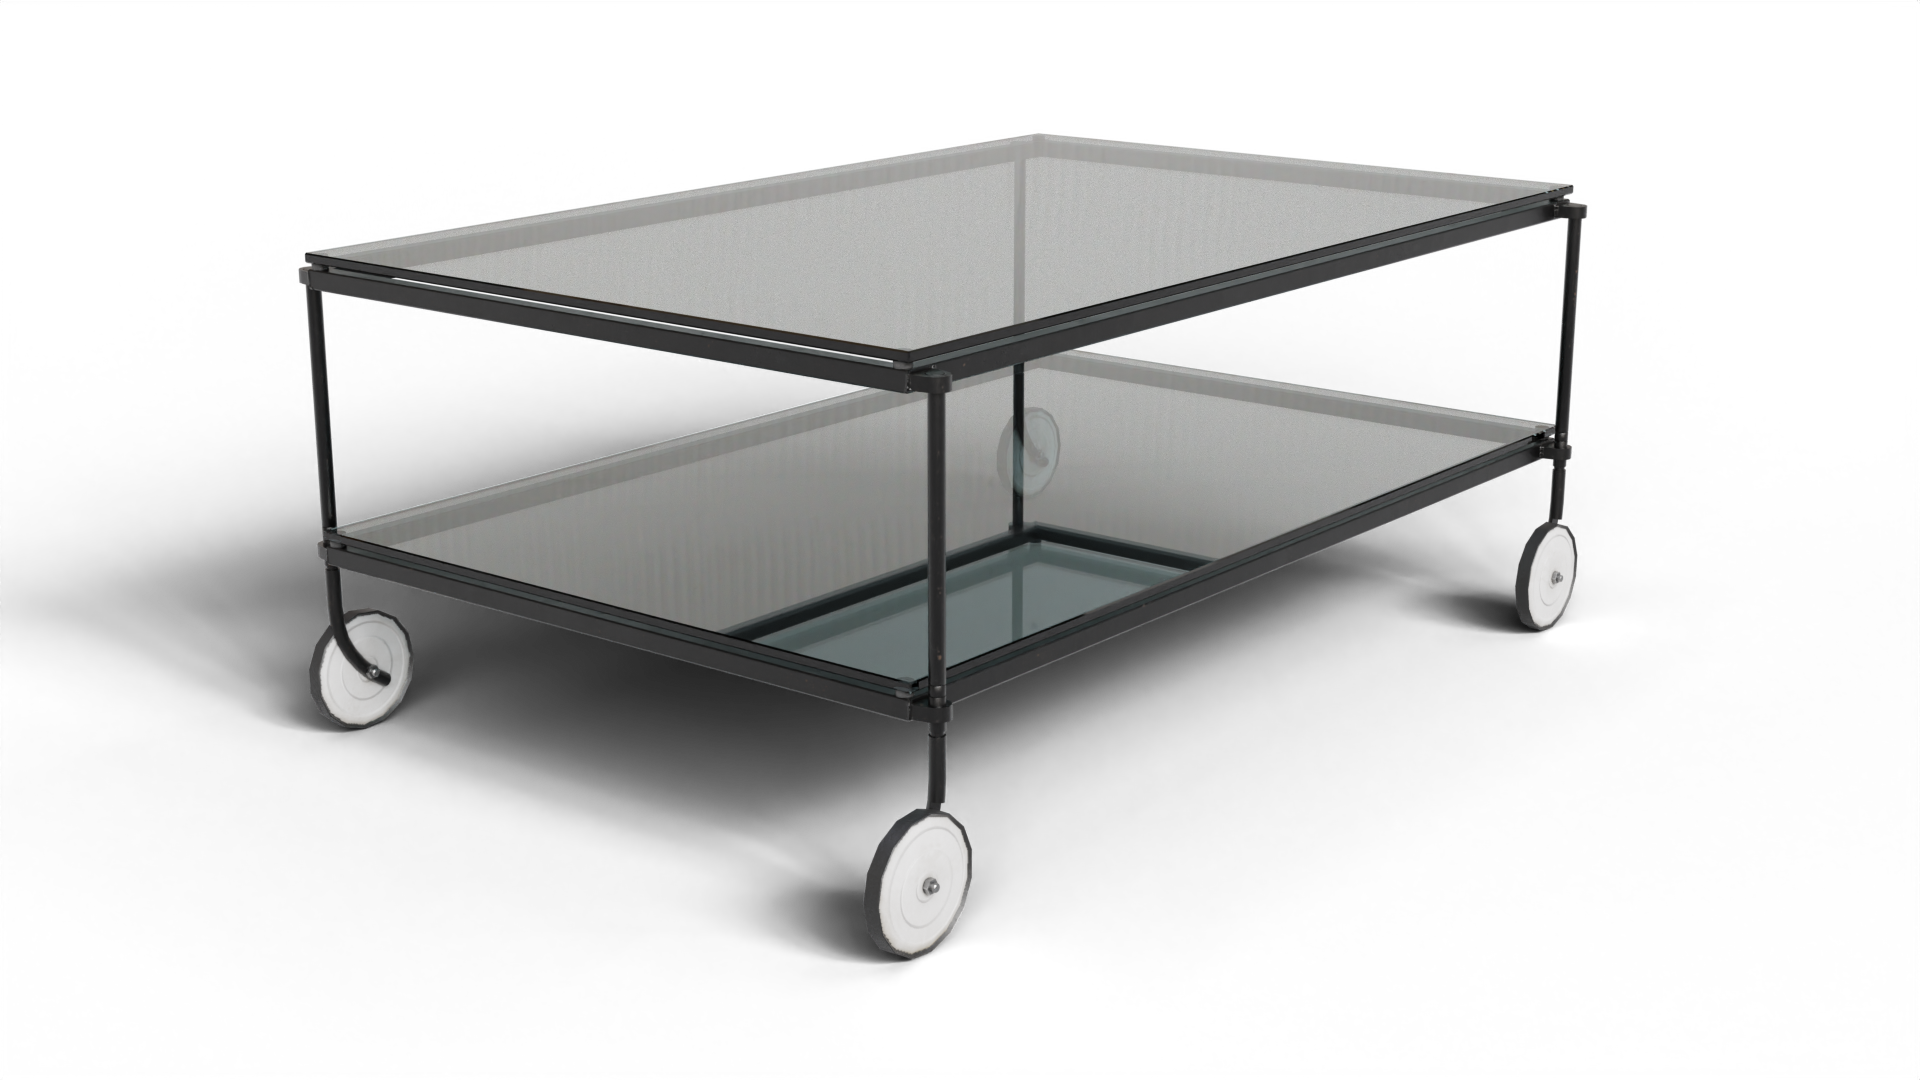 Glass table - 3ixam store